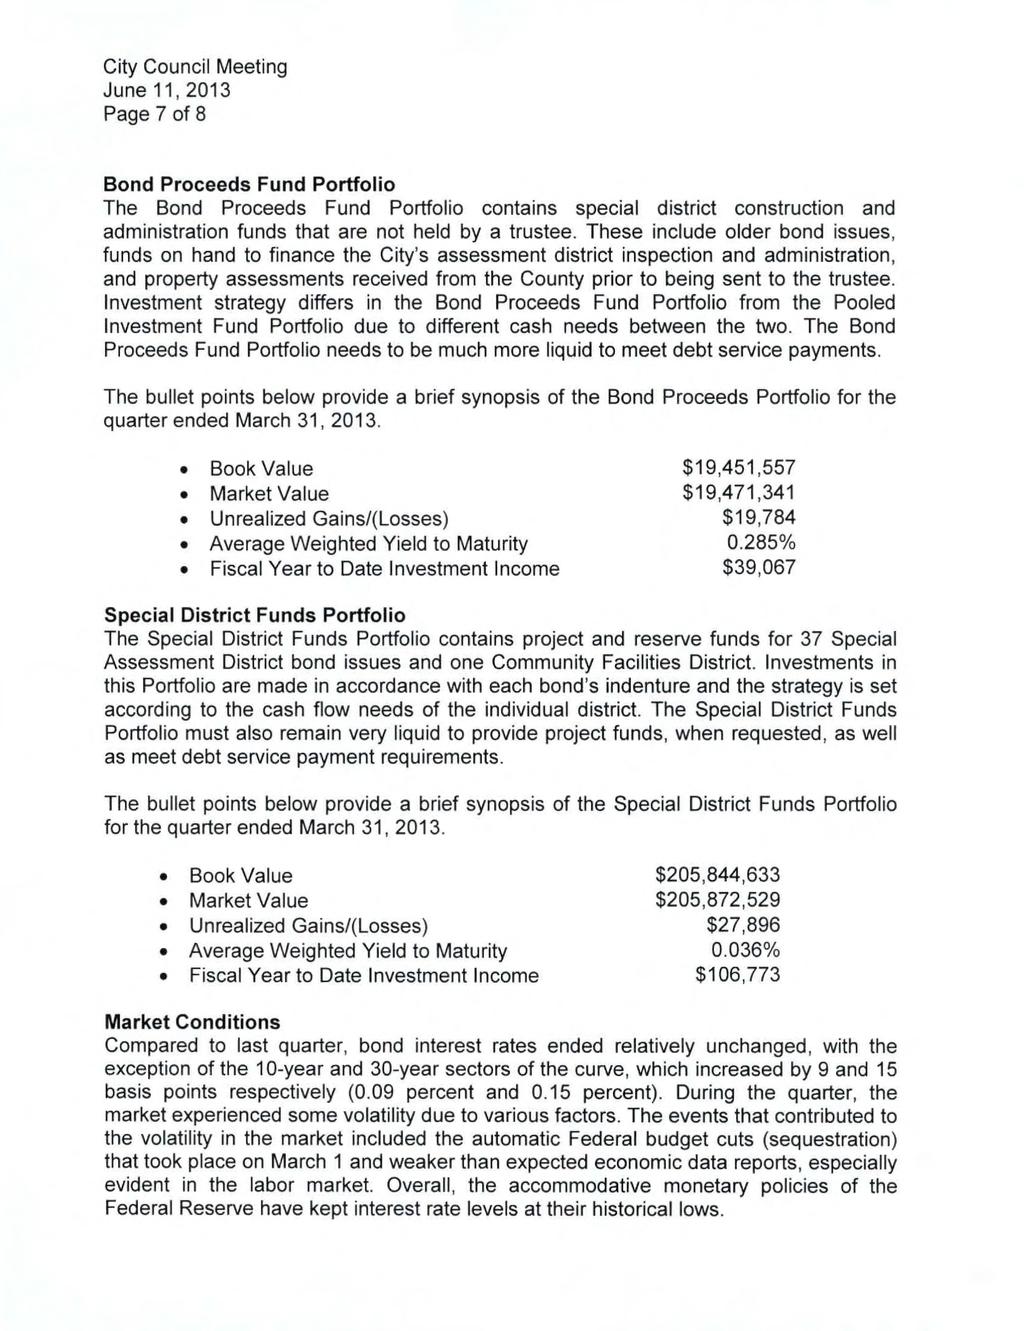 Page 7 of 8 Bond Proceeds Fund Portfolio The Bond Proceeds Fund Portfolio contains special district construction and administration funds that are not held by a trustee.